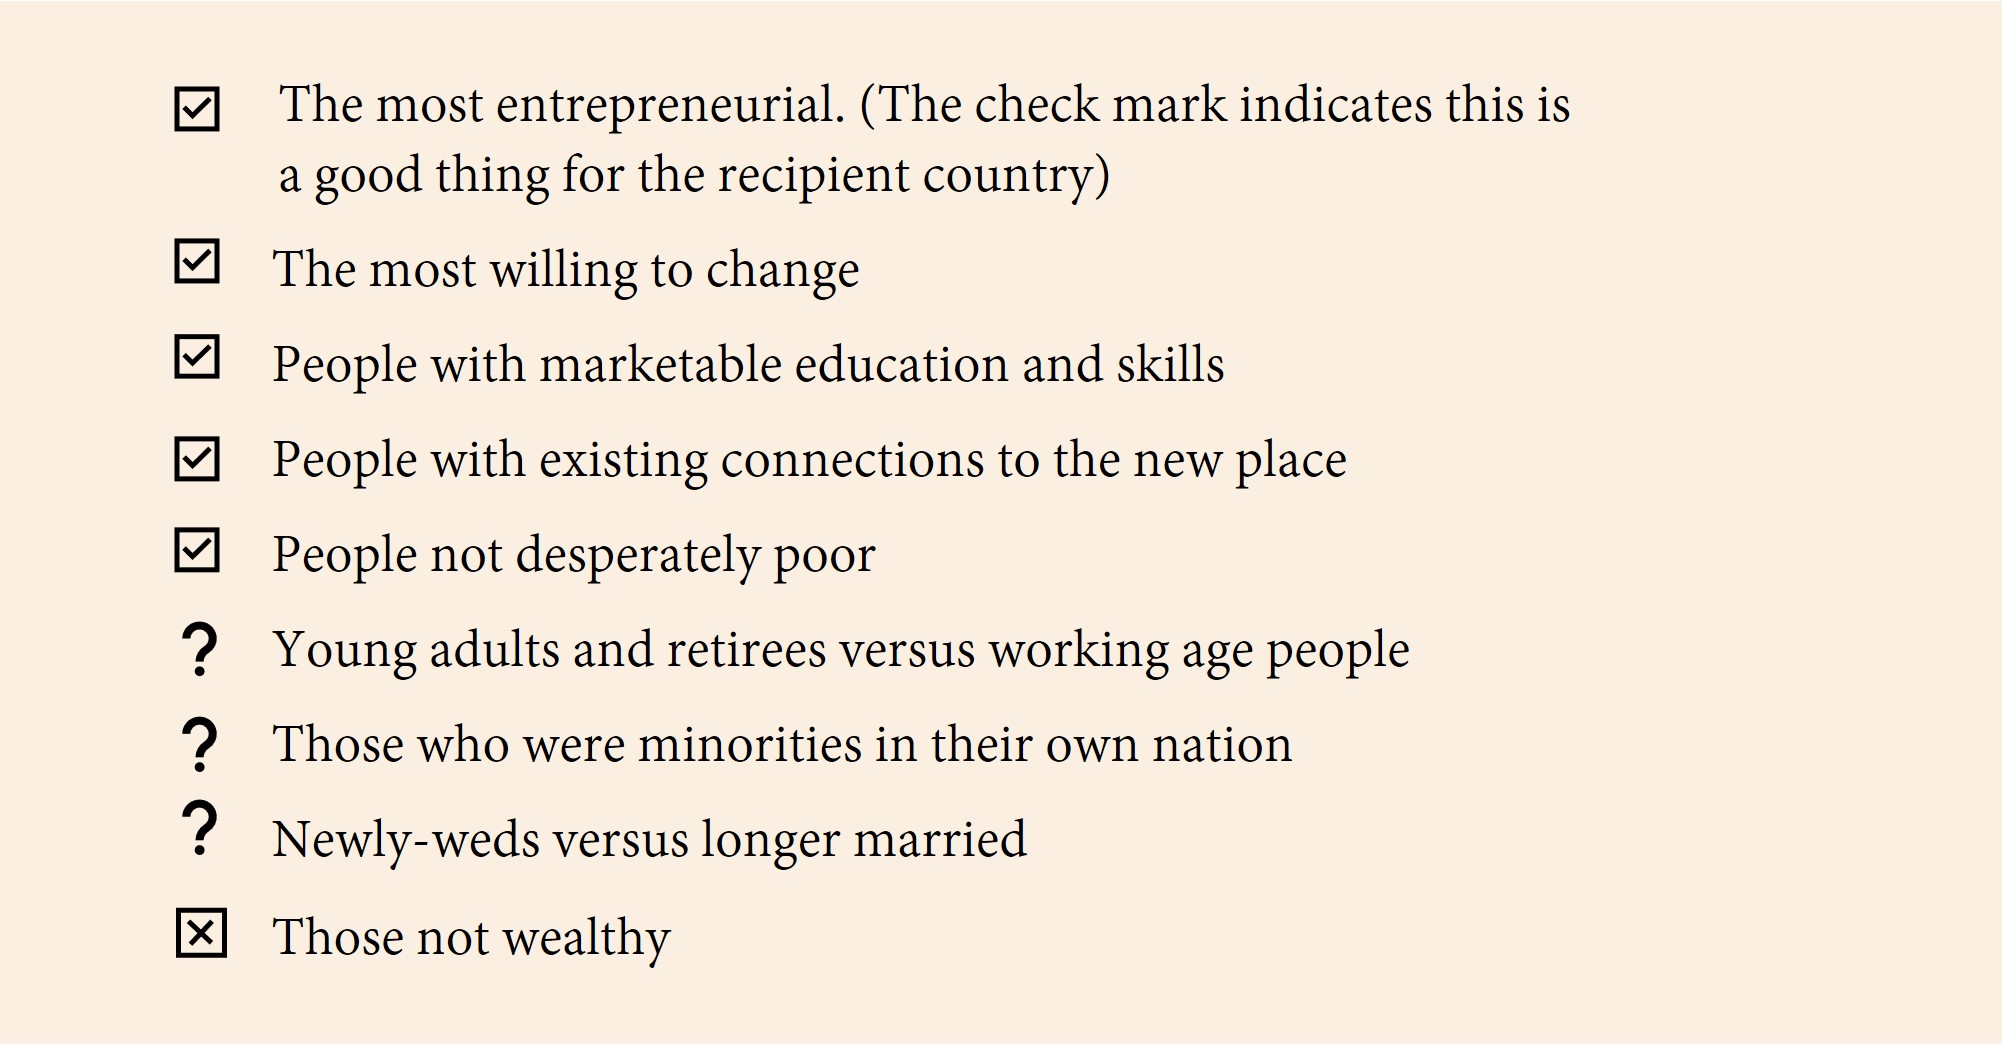 The most entrepreneurial. (The check mark indicates this is a good thing for the recipient country) The most willing to change People with marketable education and skills People with existing connections to the new place People not desperately poor Young adults and retirees versus working age people Those who were minorities in their own nation Newly-weds versus longer married Those not wealthy